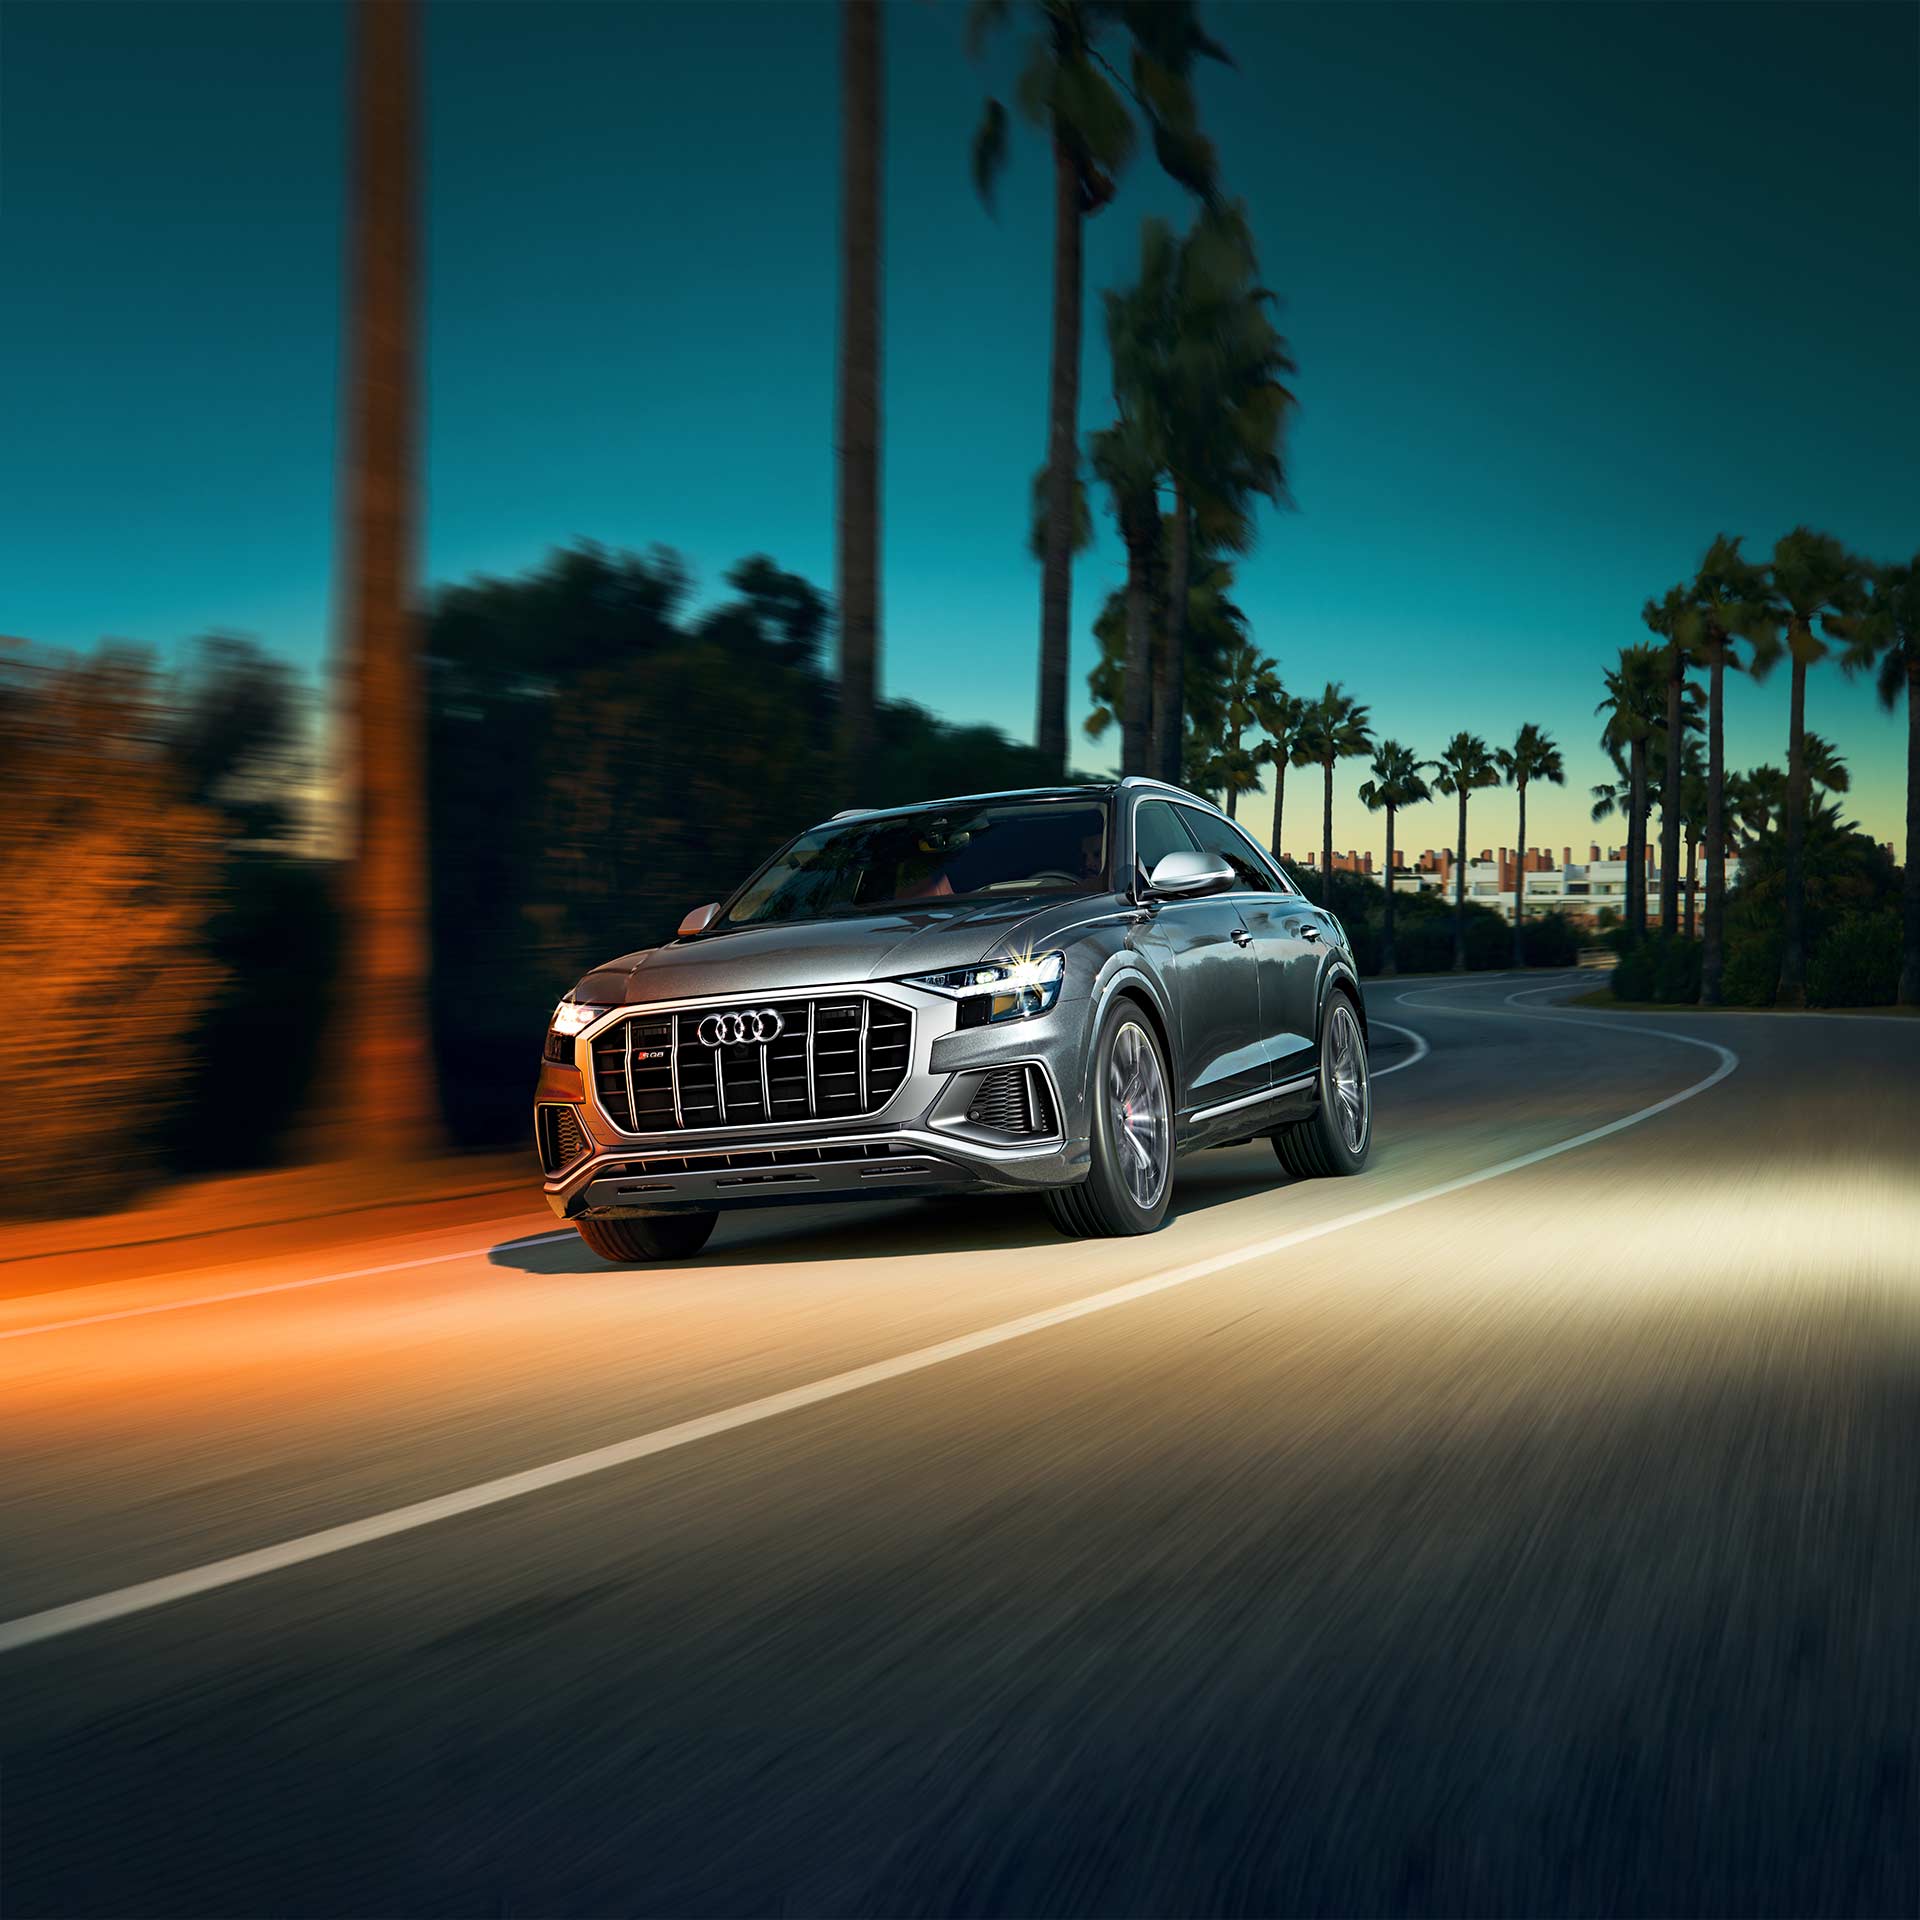 dark silver Audi Q8 SUV driving past a blurred palm tree lined street at sunset